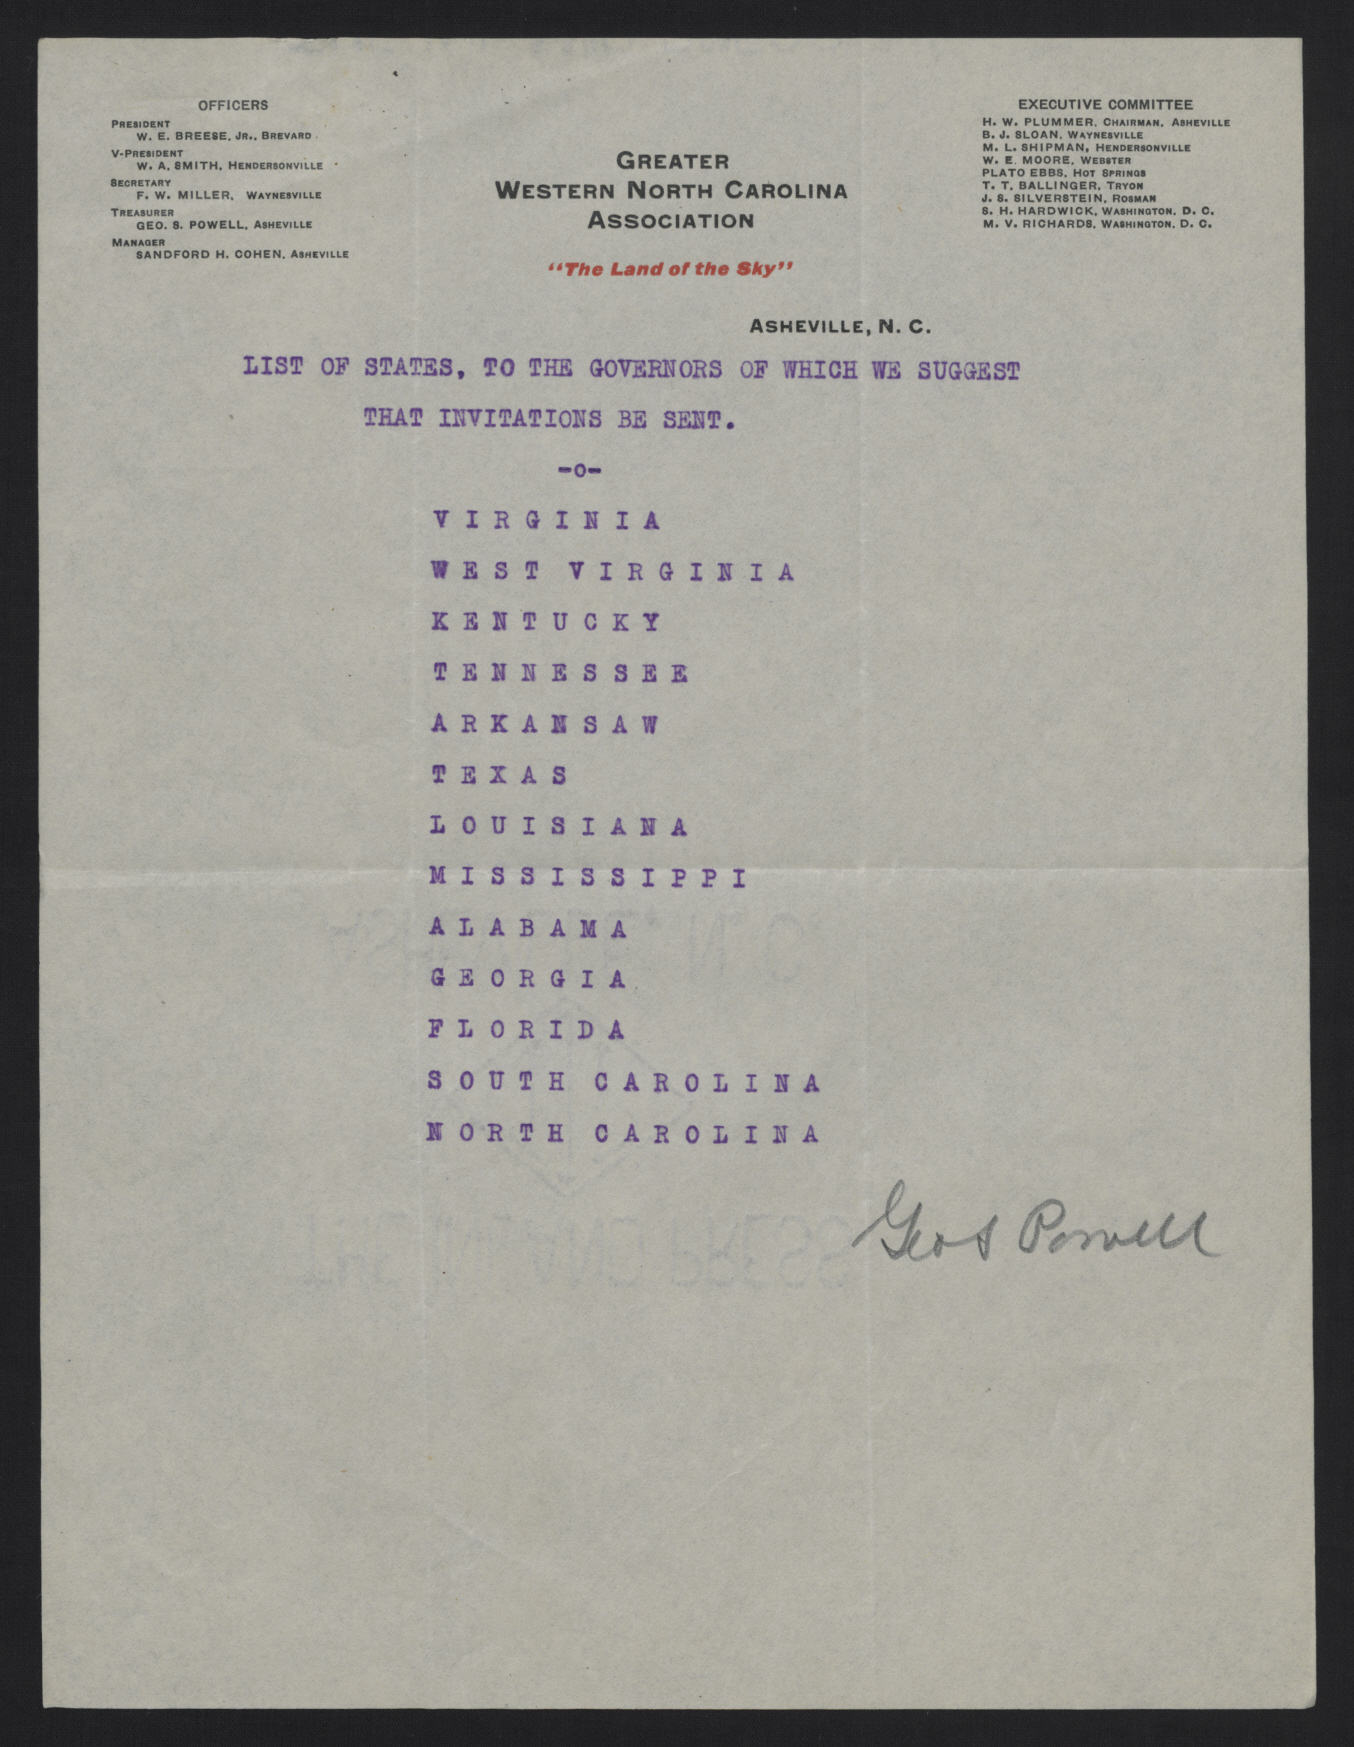 Draft of Proposed Letter of Invitation to Governors by the Greater Western North Carolina Association, circa 13 October 1913, page 2